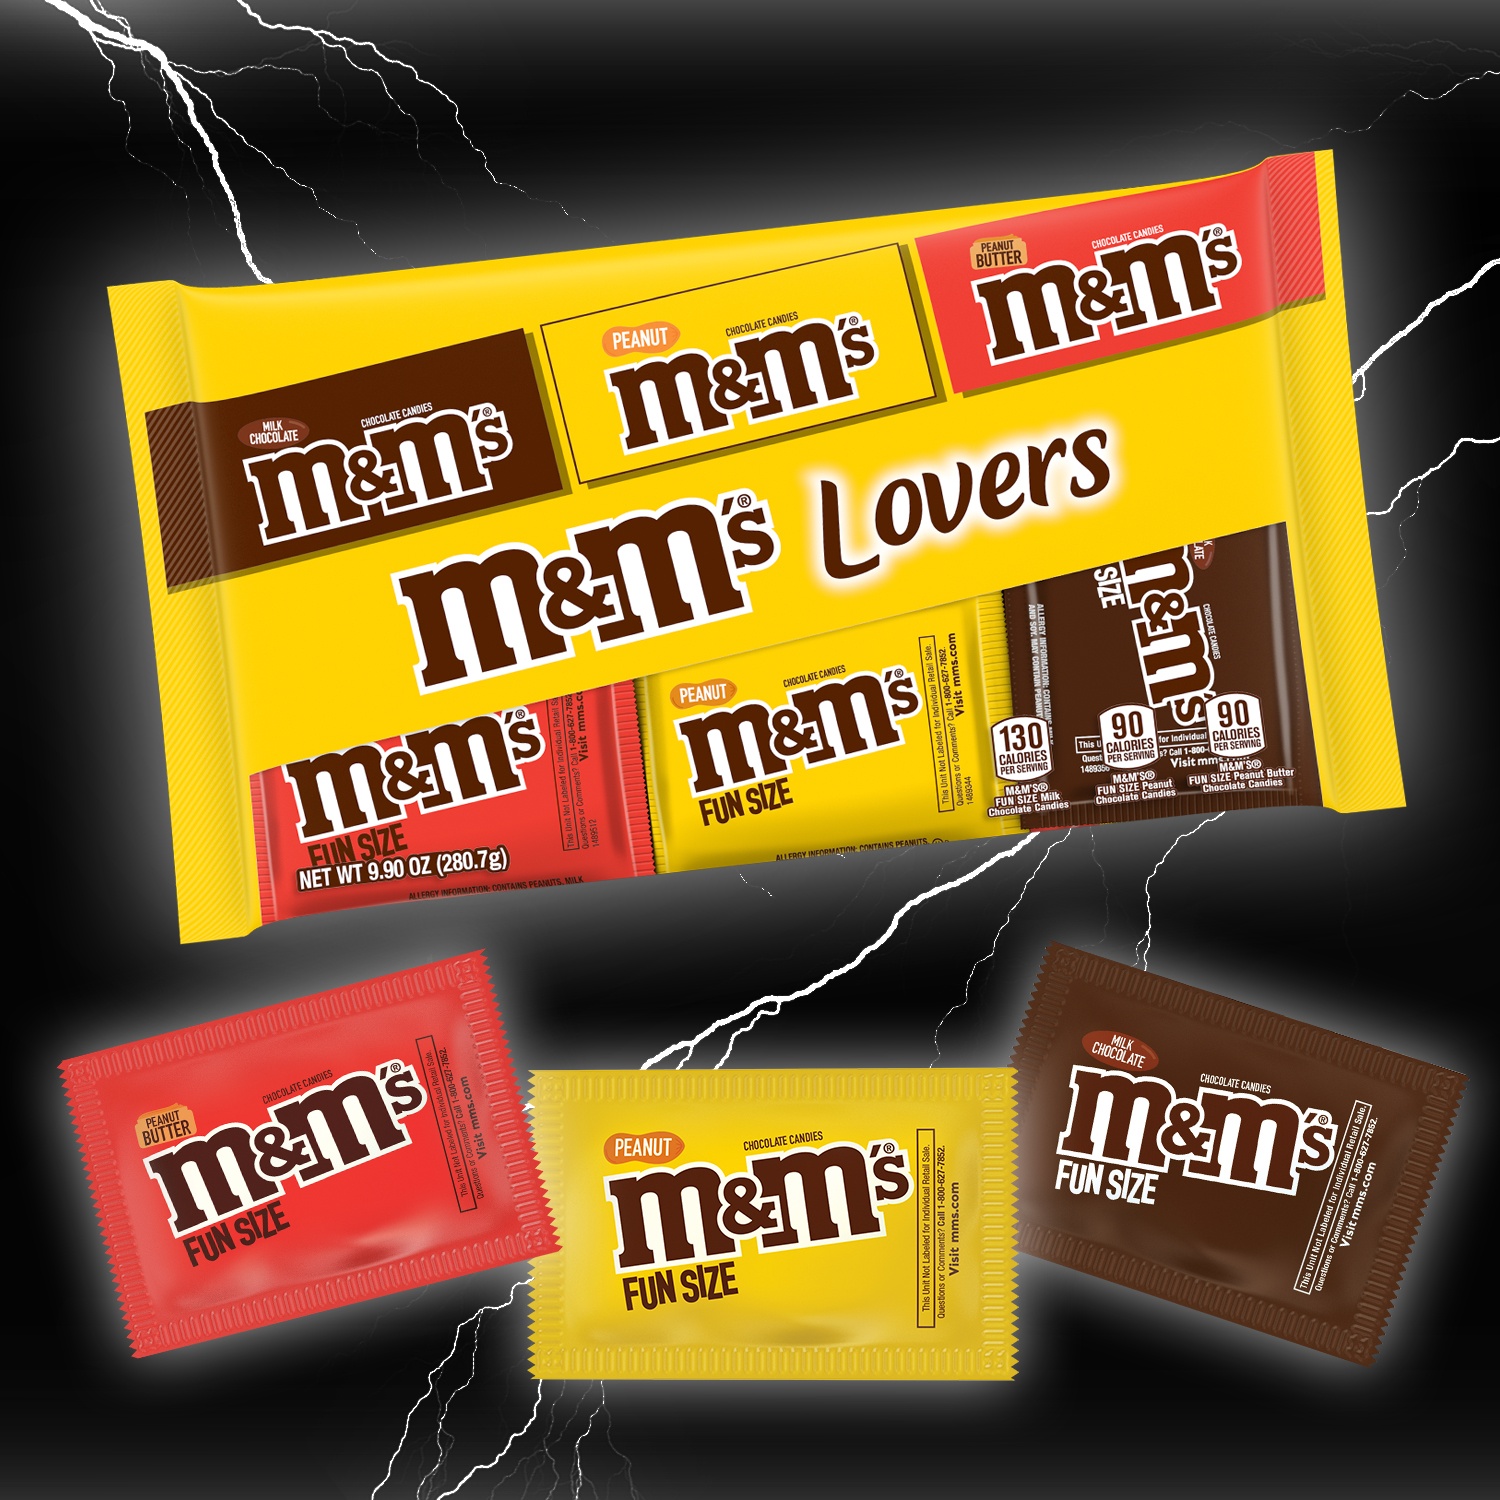 User added: Fun size peanut butter m&m's: Calories, Nutrition